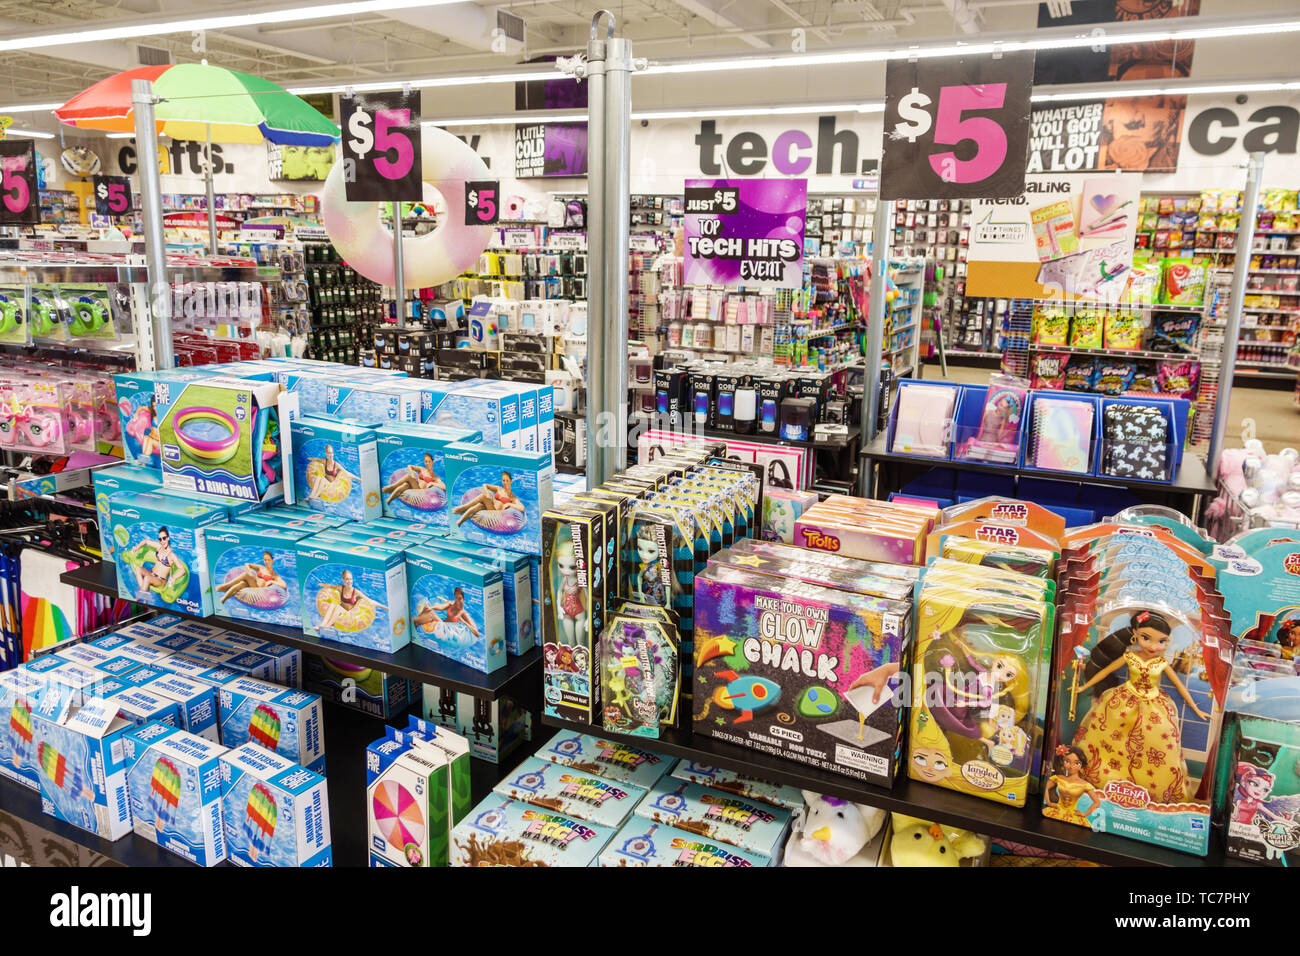 Miami Florida,Five Below,discount variety store,inside interior,shopping shopper shoppers shop shops market markets marketplace buying selling,retail Stock Photo